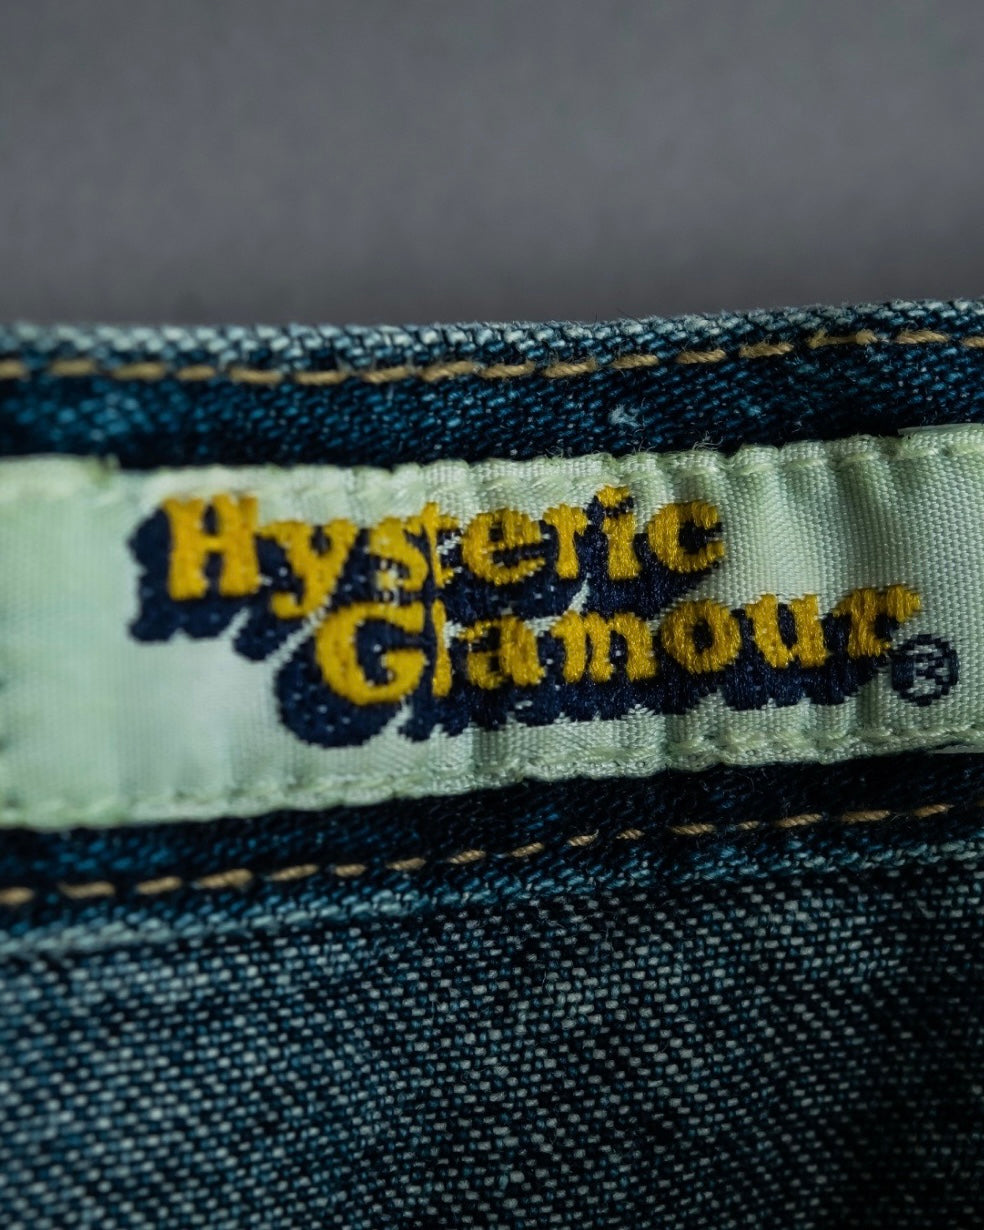 Hysteric Gramour archive skirt